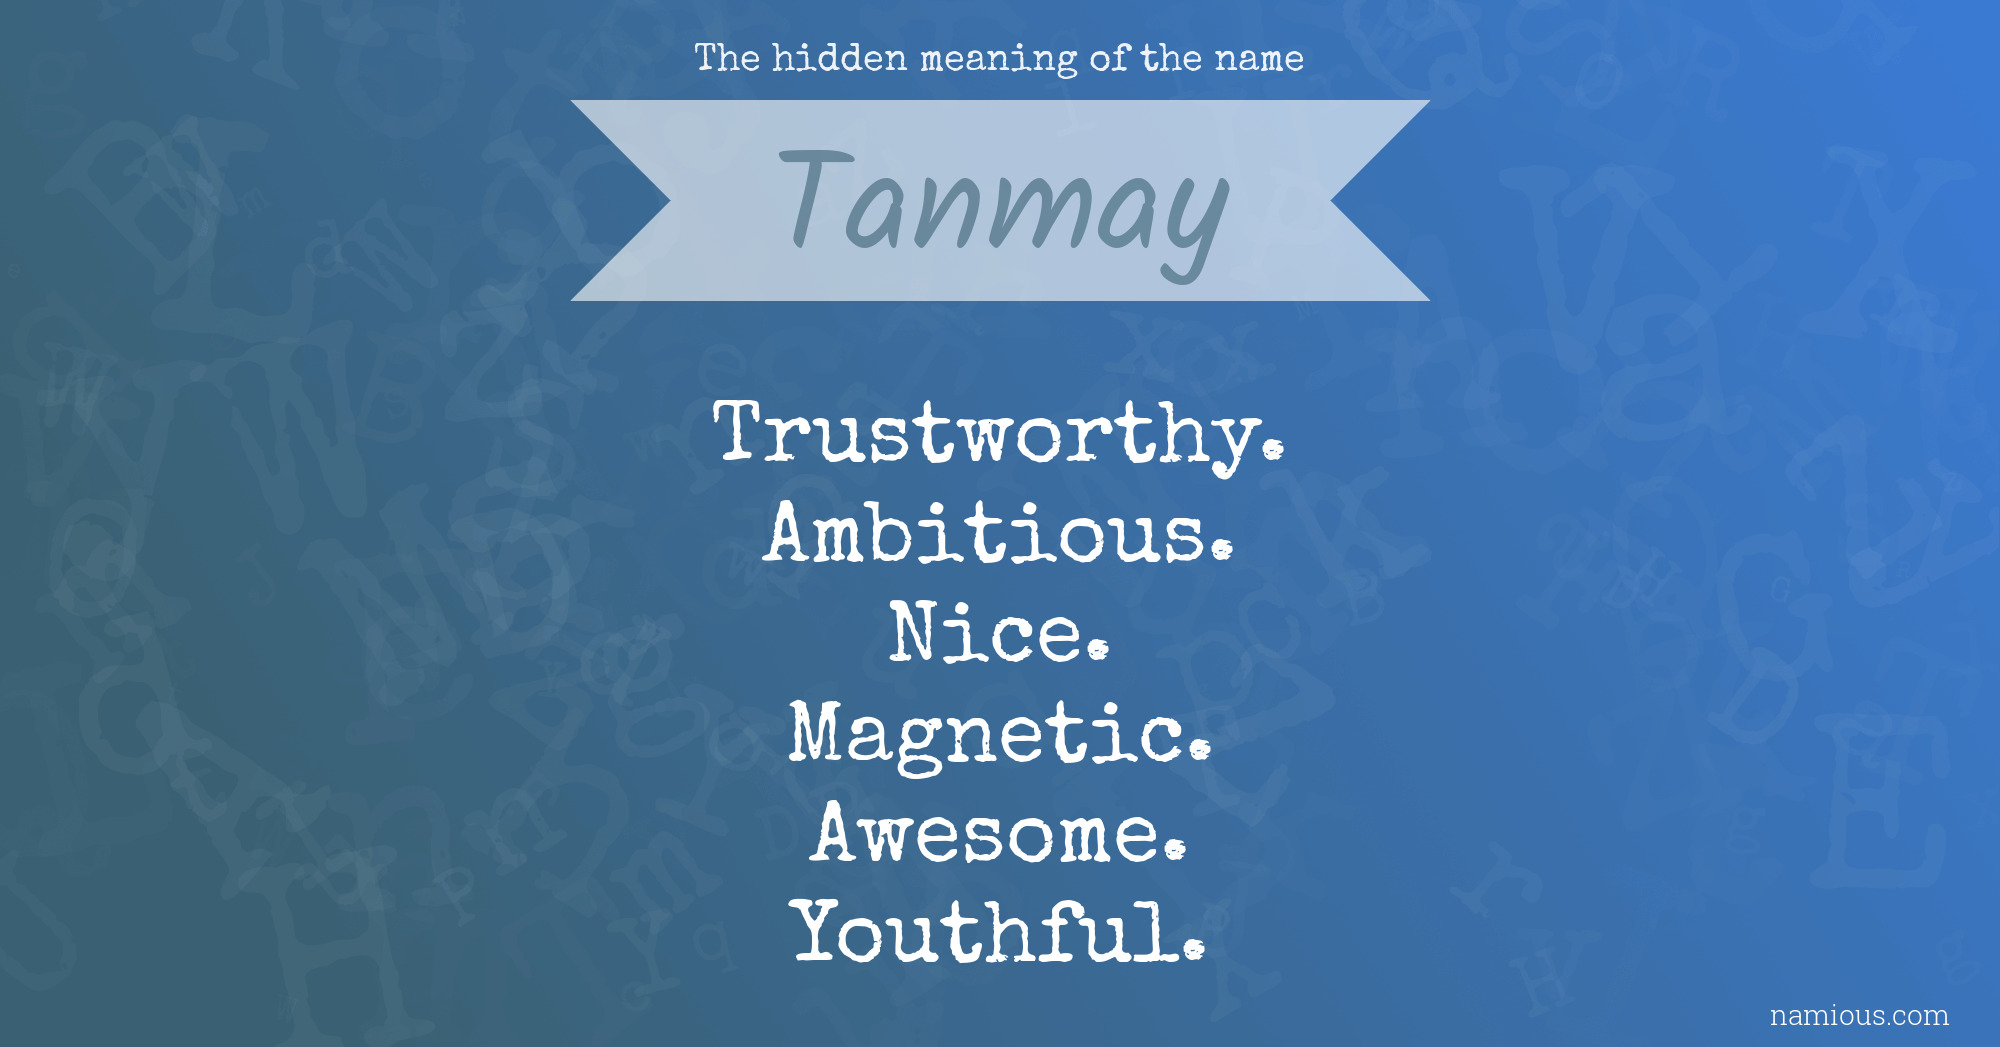 The hidden meaning of the name Tanmay | Namious